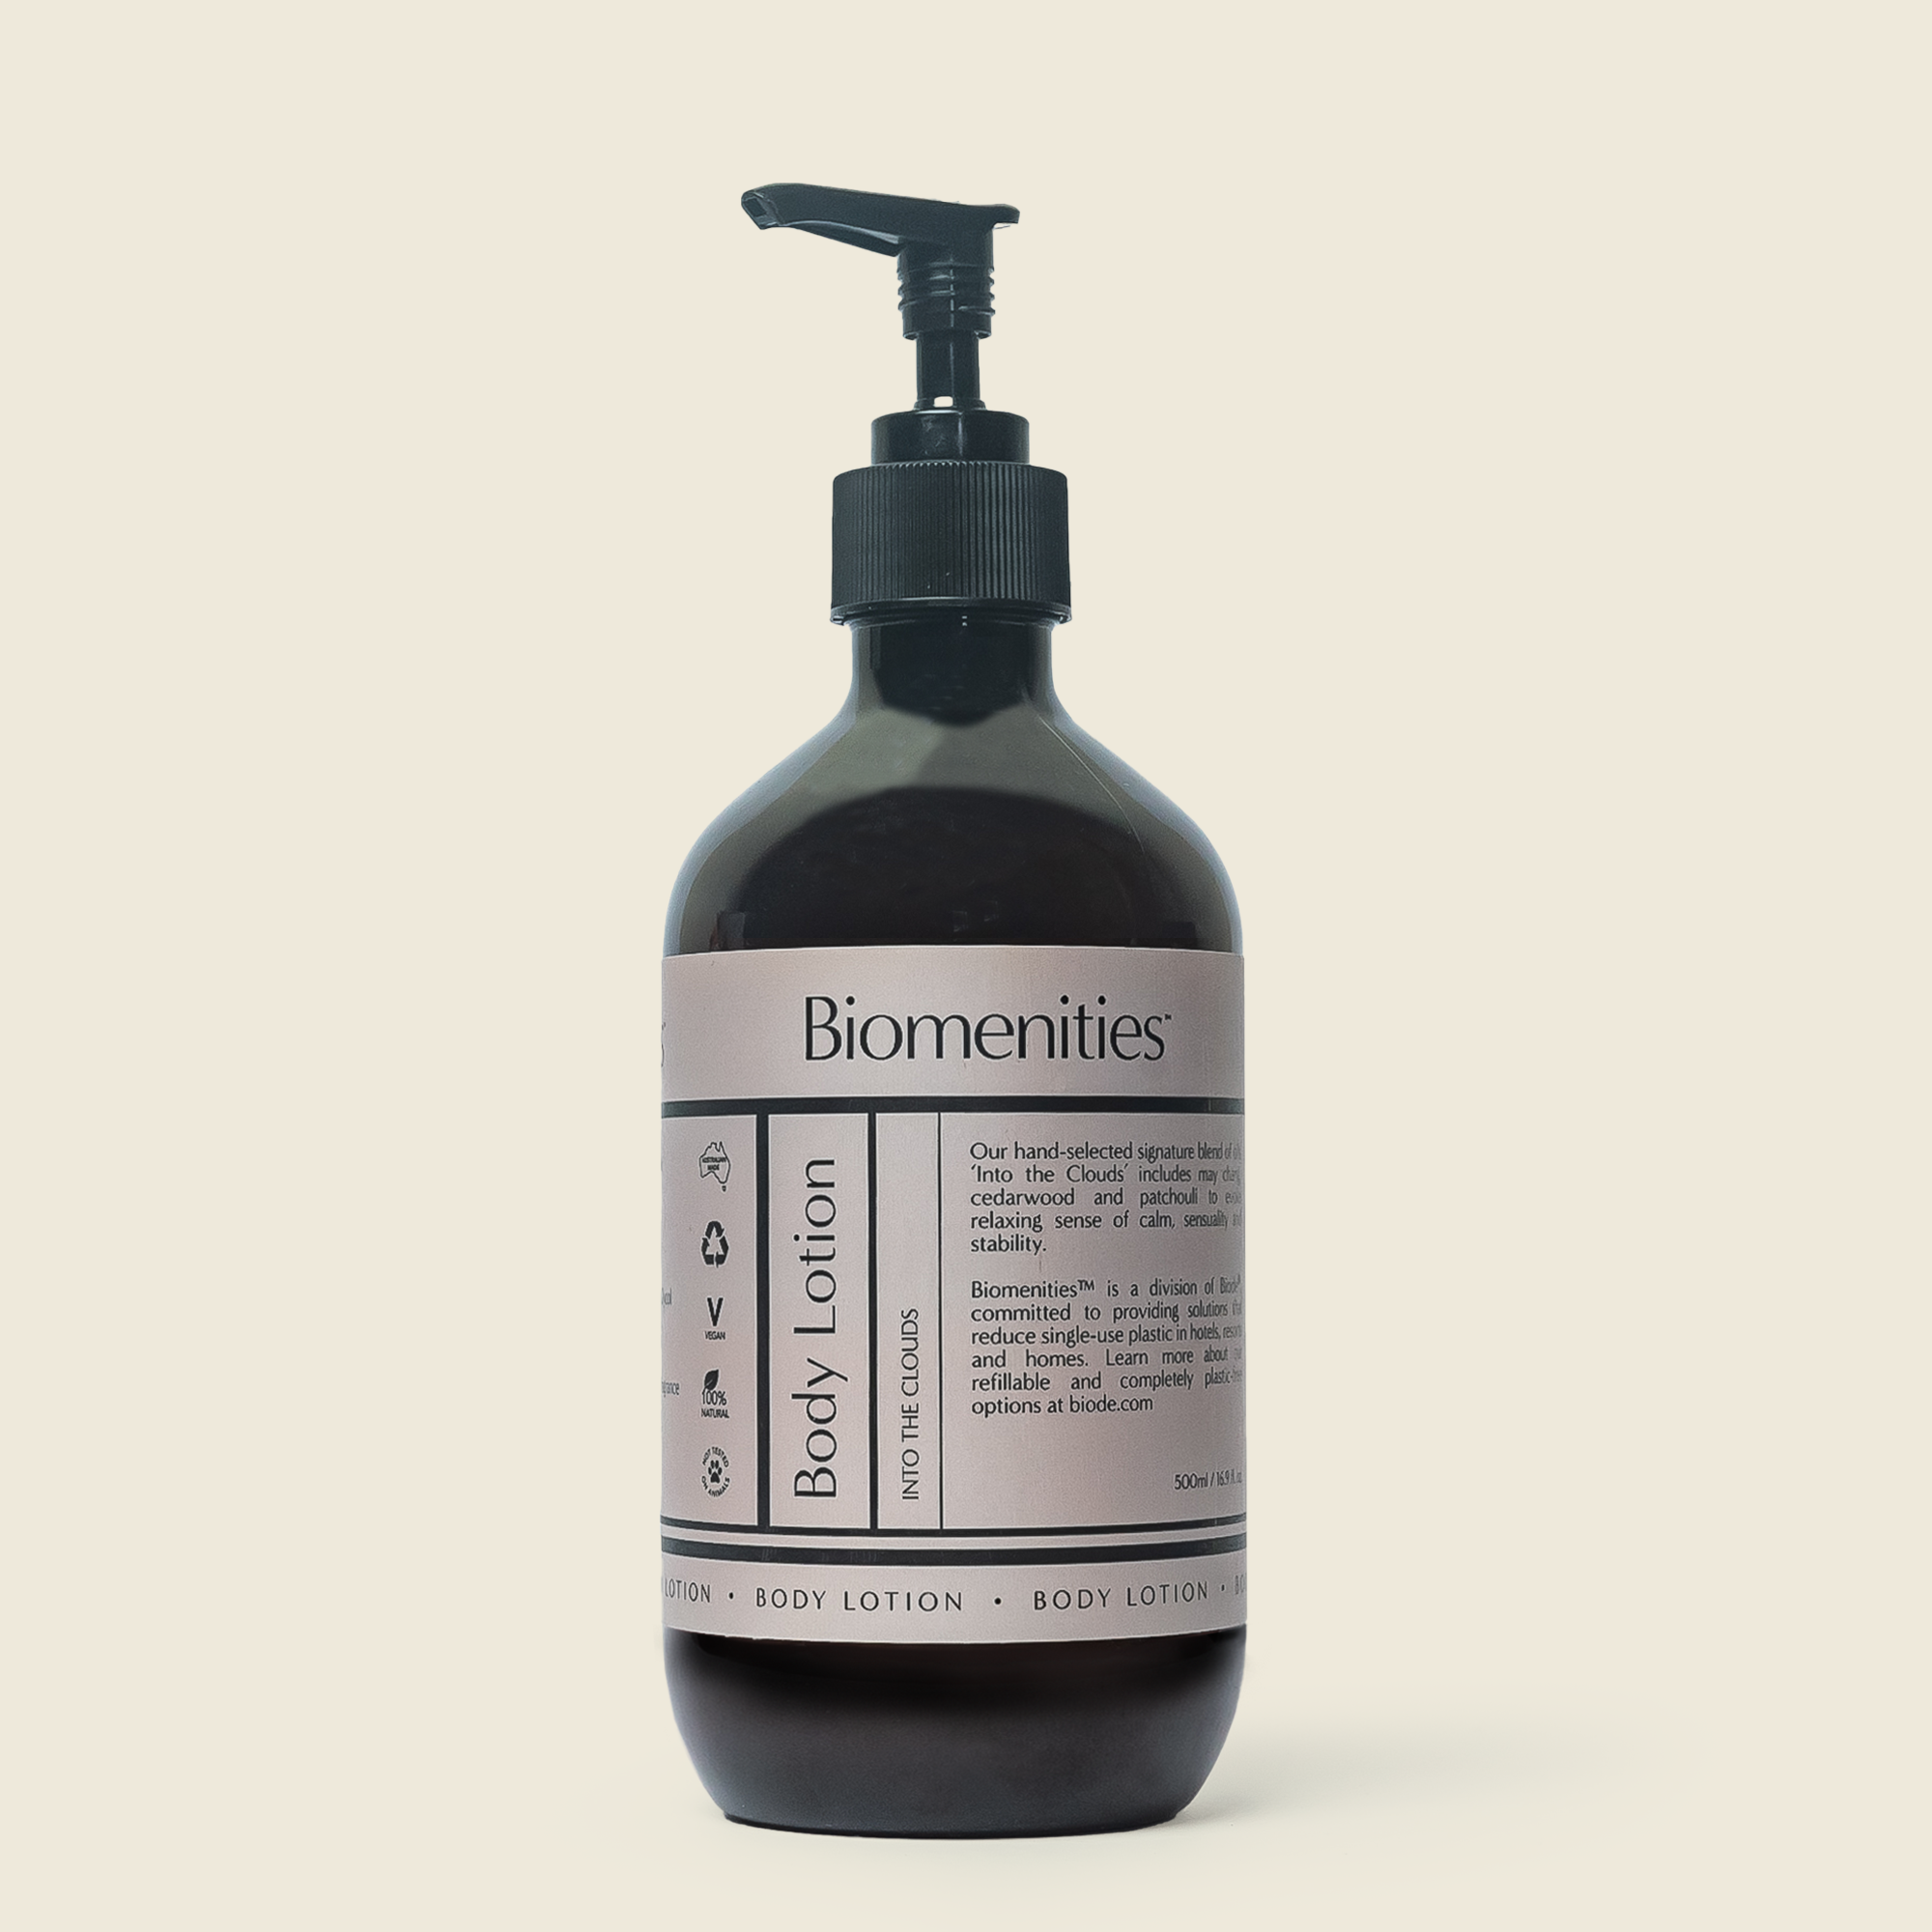 Biomenities "Into the Clouds" Body Lotion